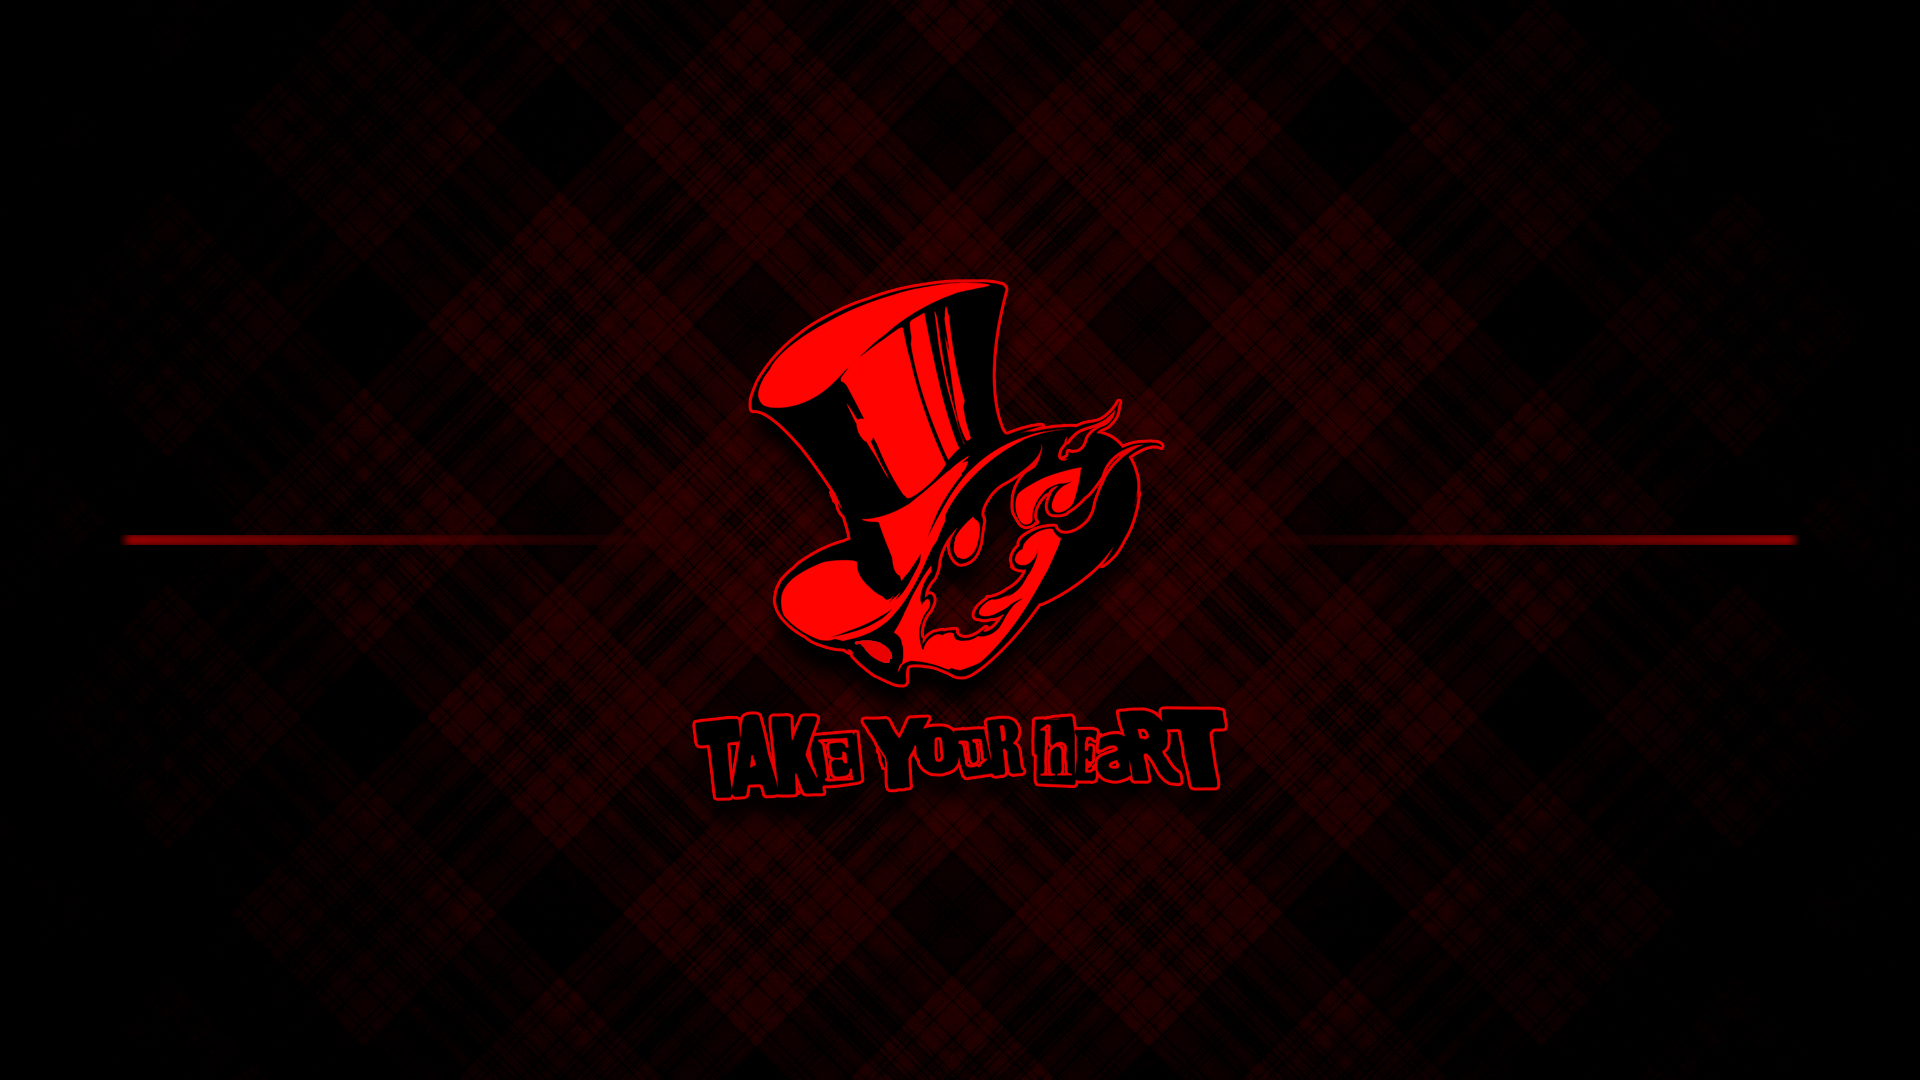 Persona 5 Persona 5 Red Abstract Phantom Thieves Persona Series Atlus 1920x1080